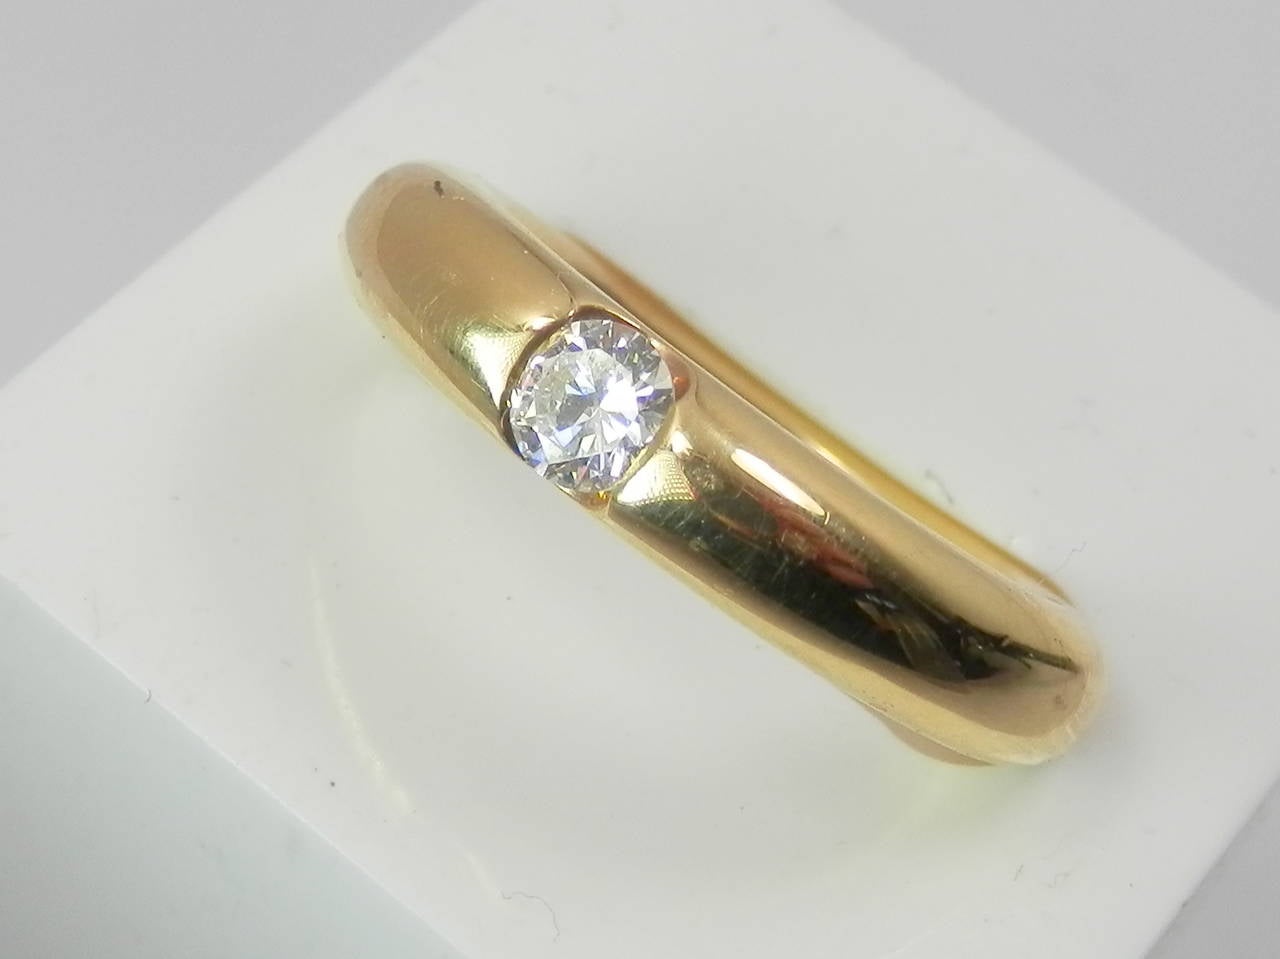 Signed Cartier, 1993,  750 52, also with French hallmarks, and 78 gr 0.25. The center diamond is .25 cts. can be sized.  Now a size 5 1/2 to 6